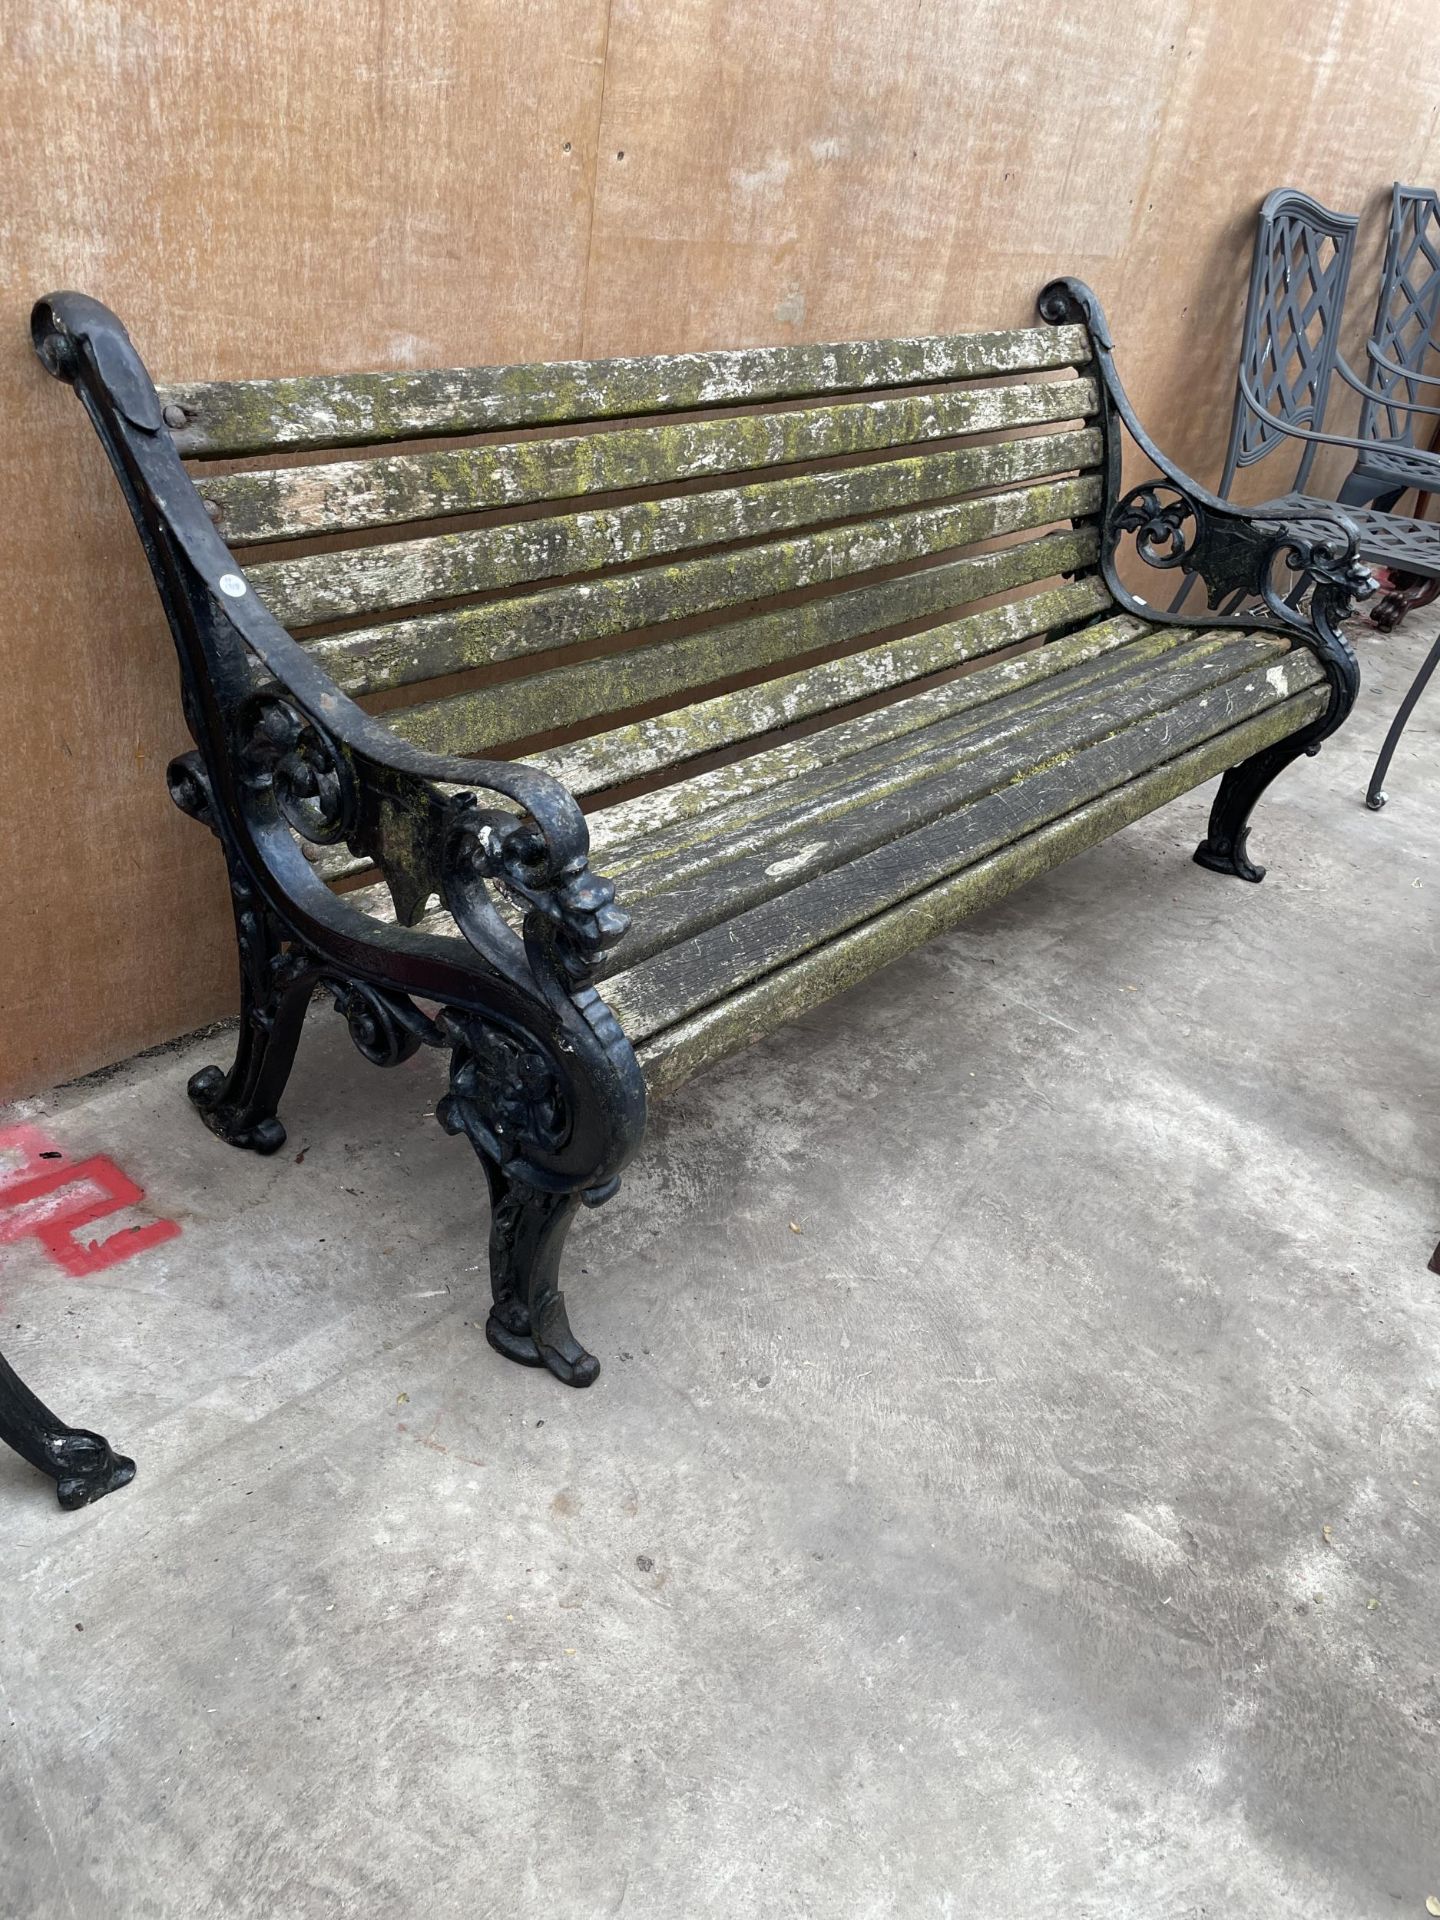 A HEAVY DUTY WOODEN SLATTED GARDEN BENCH WITH A PAIR OF HEAVILY DECORATED CAST IRON BENCH ENDS